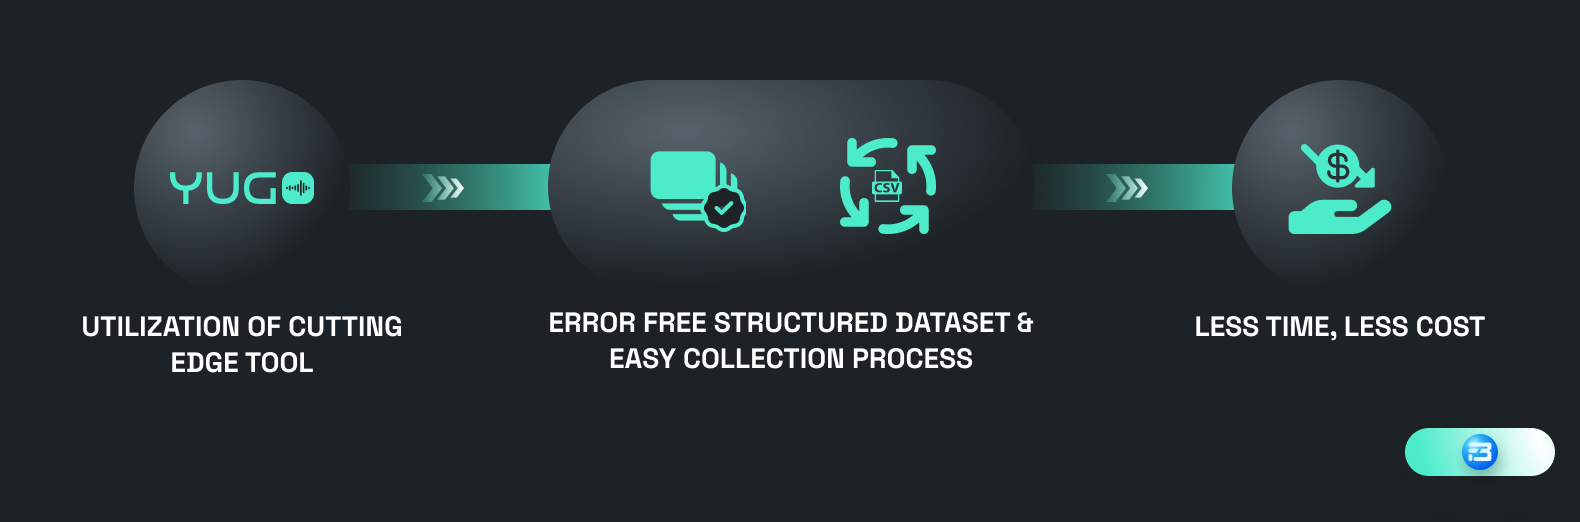 Leverage cutting-edge tools to create error-free structured datasets and streamline the collection process for high-quality data in less time and at lower costs.